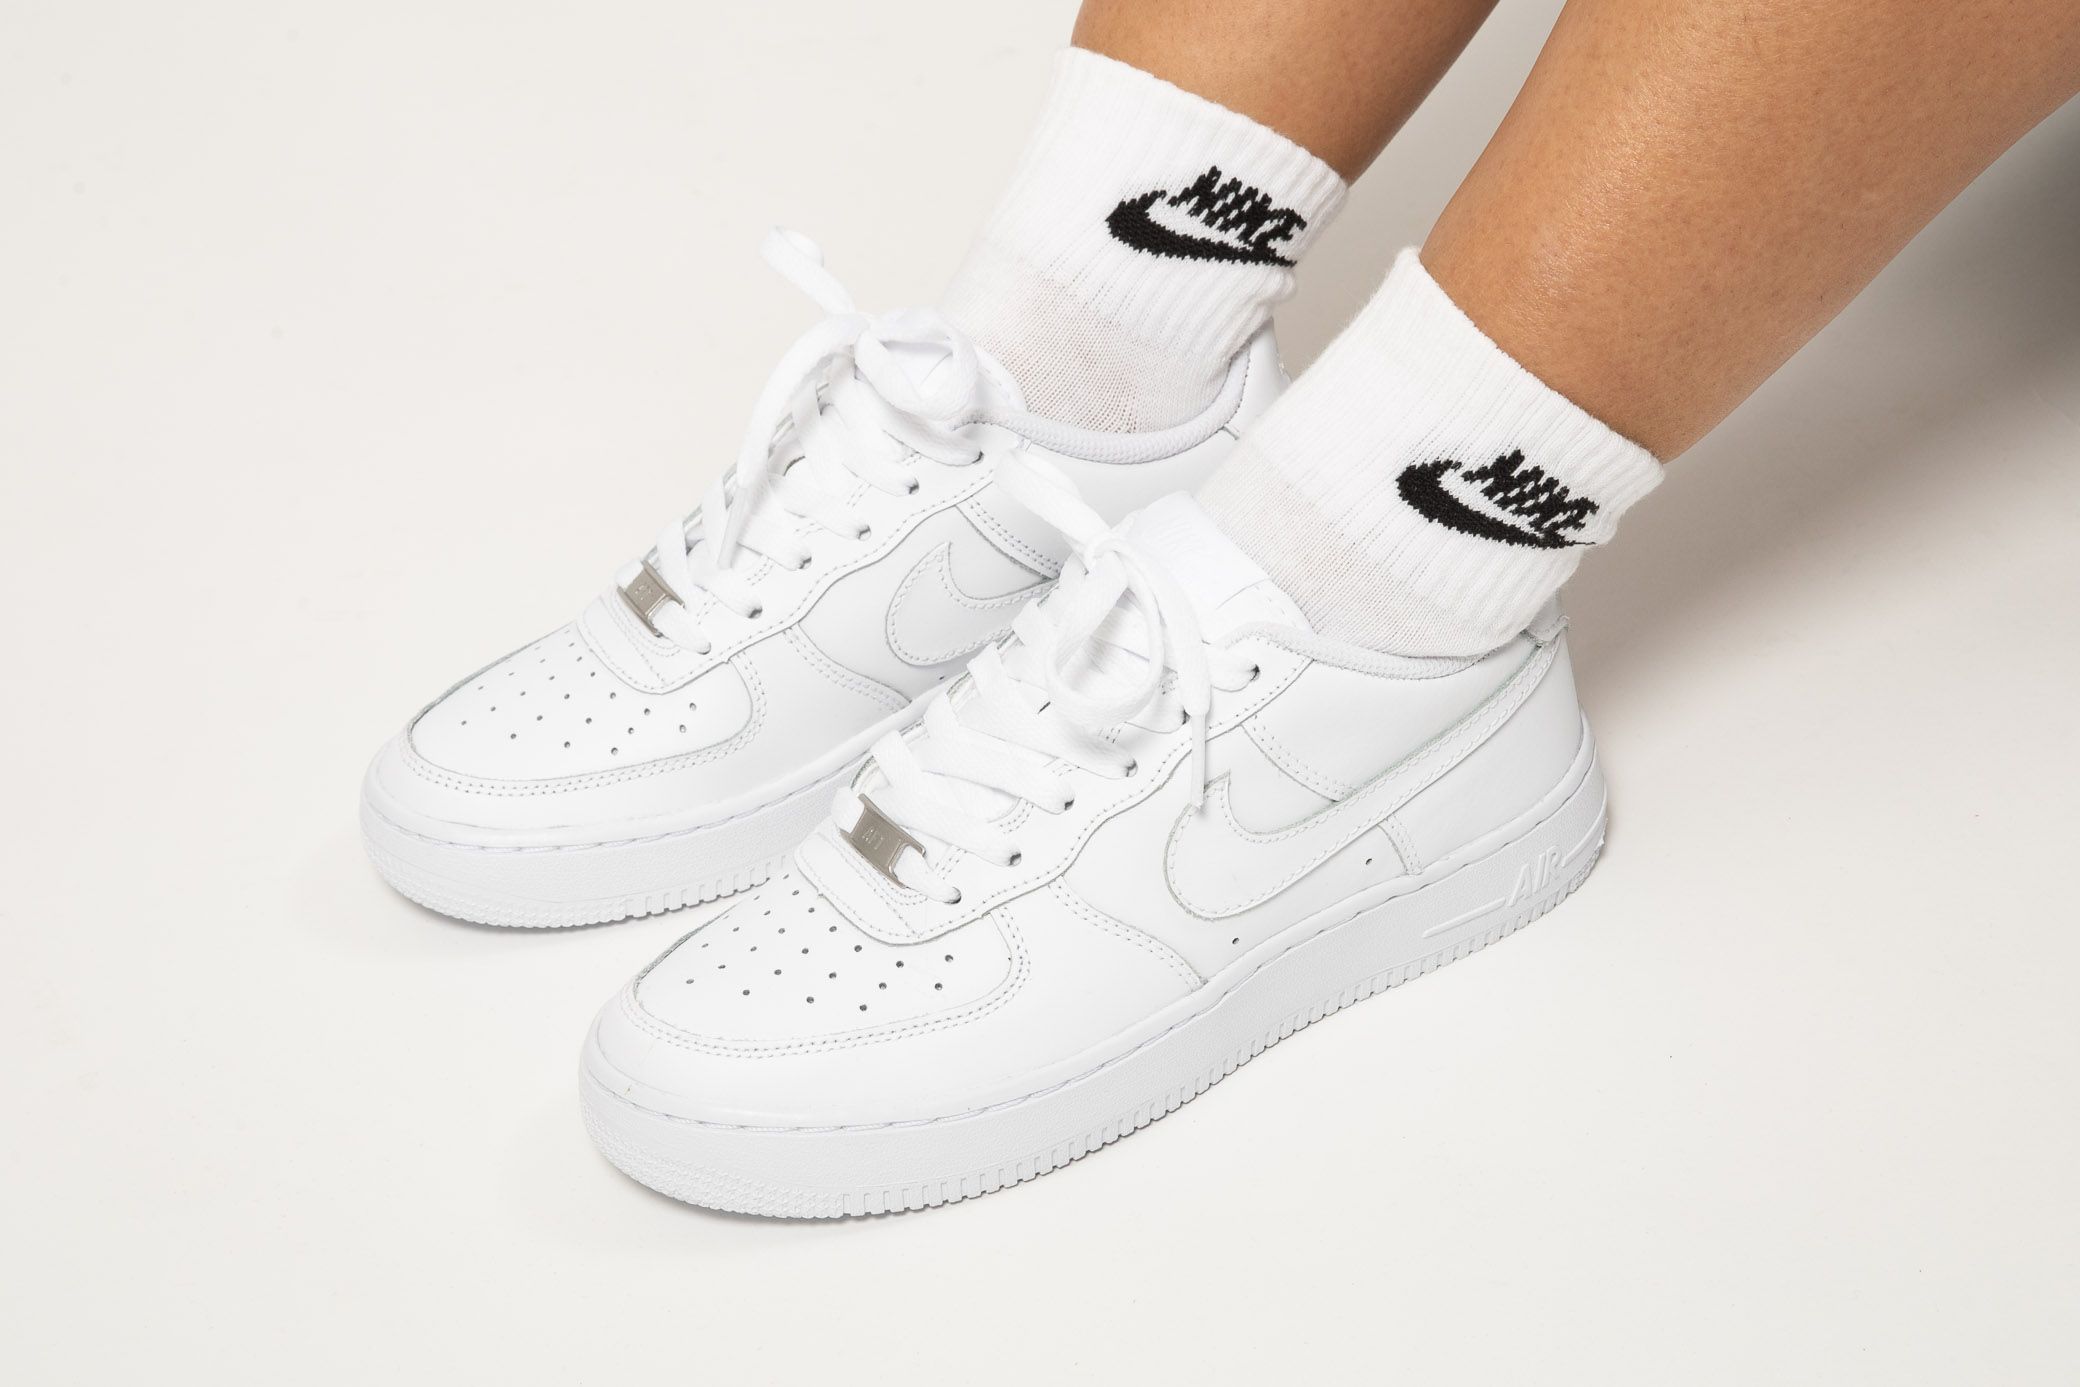 Titolo on Twitter: "back in Nike Air Force 1 Low (GS). Now available get your pair https://t.co/PttwZLv86h US 3.5Y (36) - US 7Y (40) ⁠ style code 🔎 314192-117⁠ ⁠ #